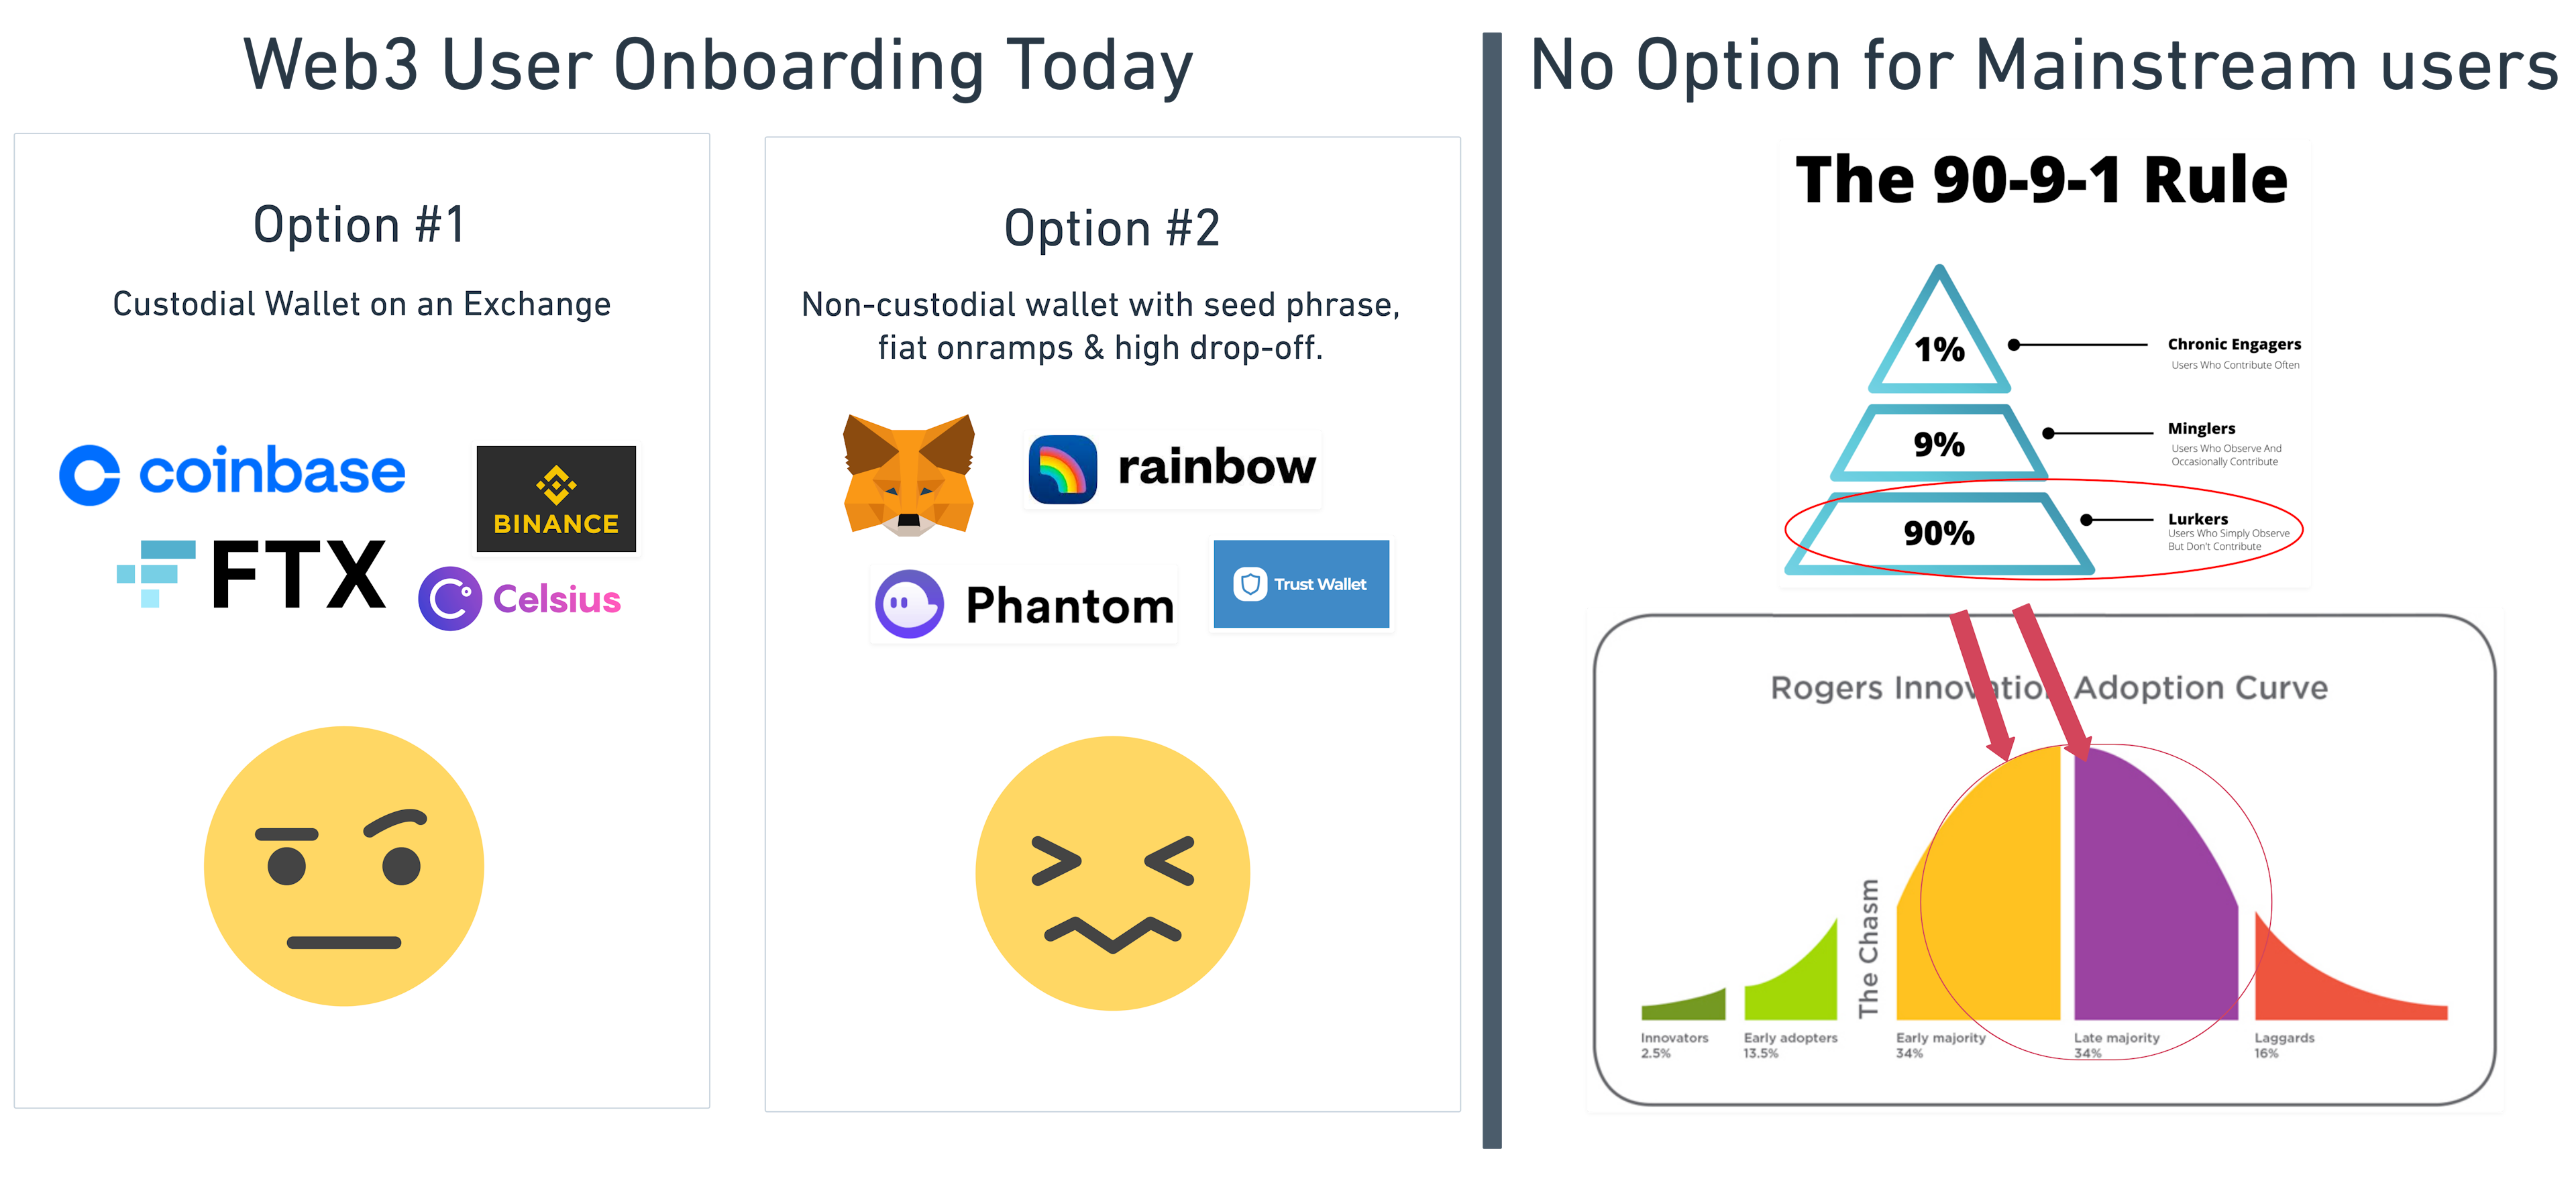 Web3 User Onboarding is still focused on early adopters and investors. We need a more passive onboarding option for mainstream users, the next wave of growth.